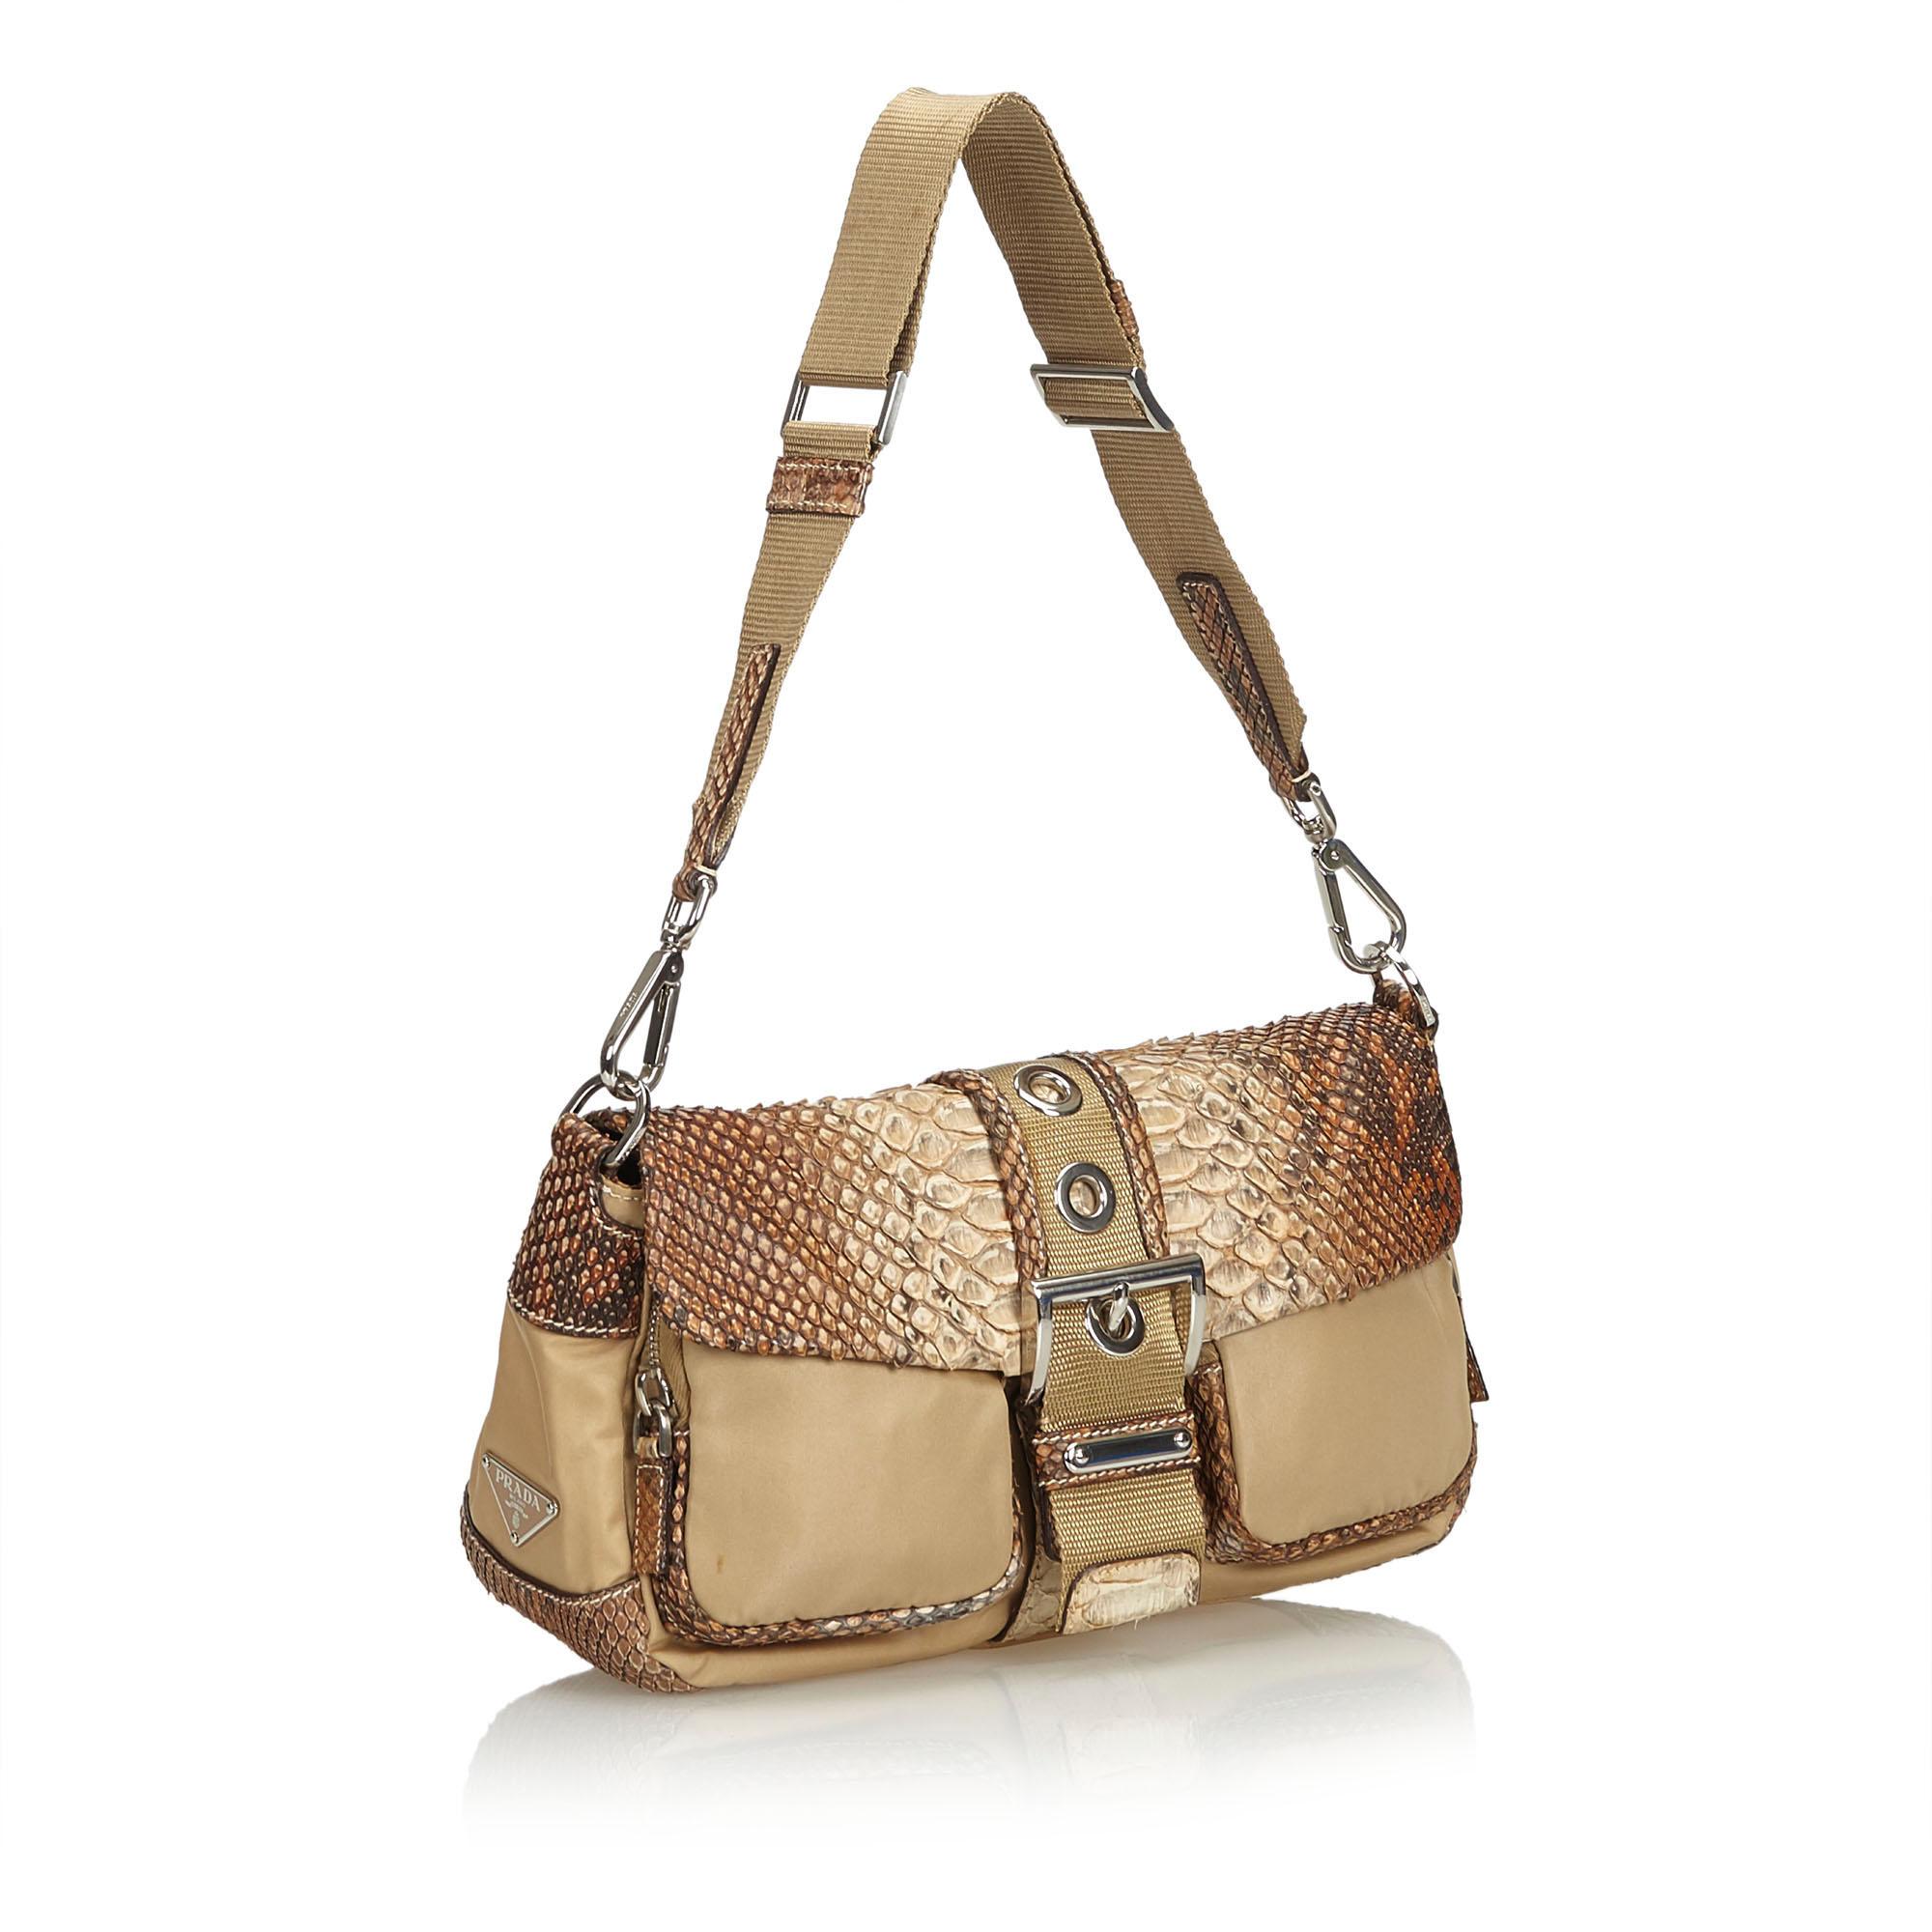 This shoulder bag features a nylon body with python leather trim, front exterior compartments, a top flap with a buckle closure, an open top, and an interior zip pocket. It carries as AB condition rating.

Inclusions: 
Dust Bag
Dimensions:
Length: